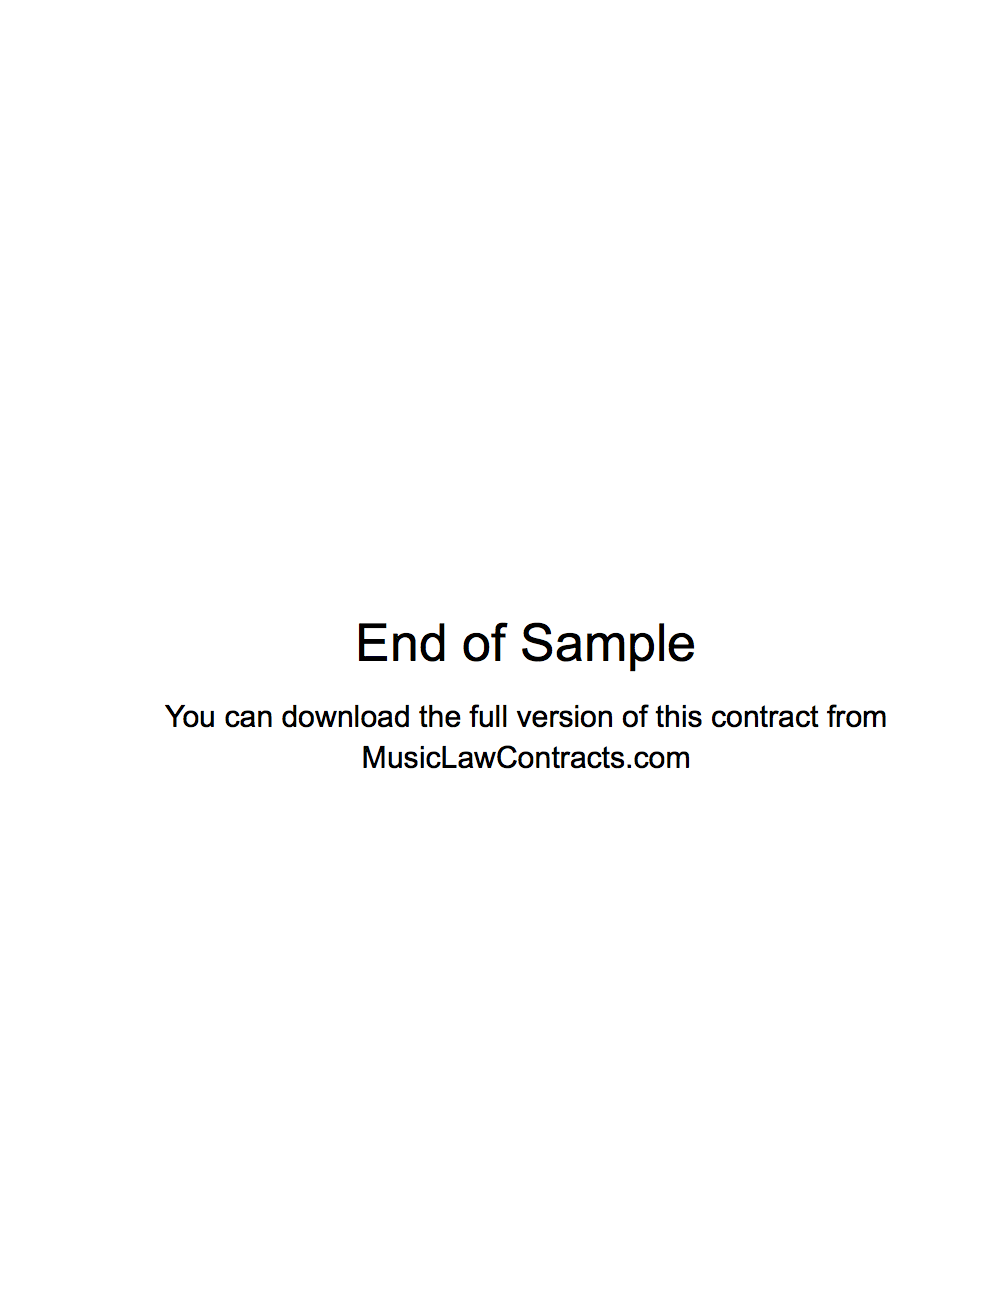 End of Sample Music Law Contracts